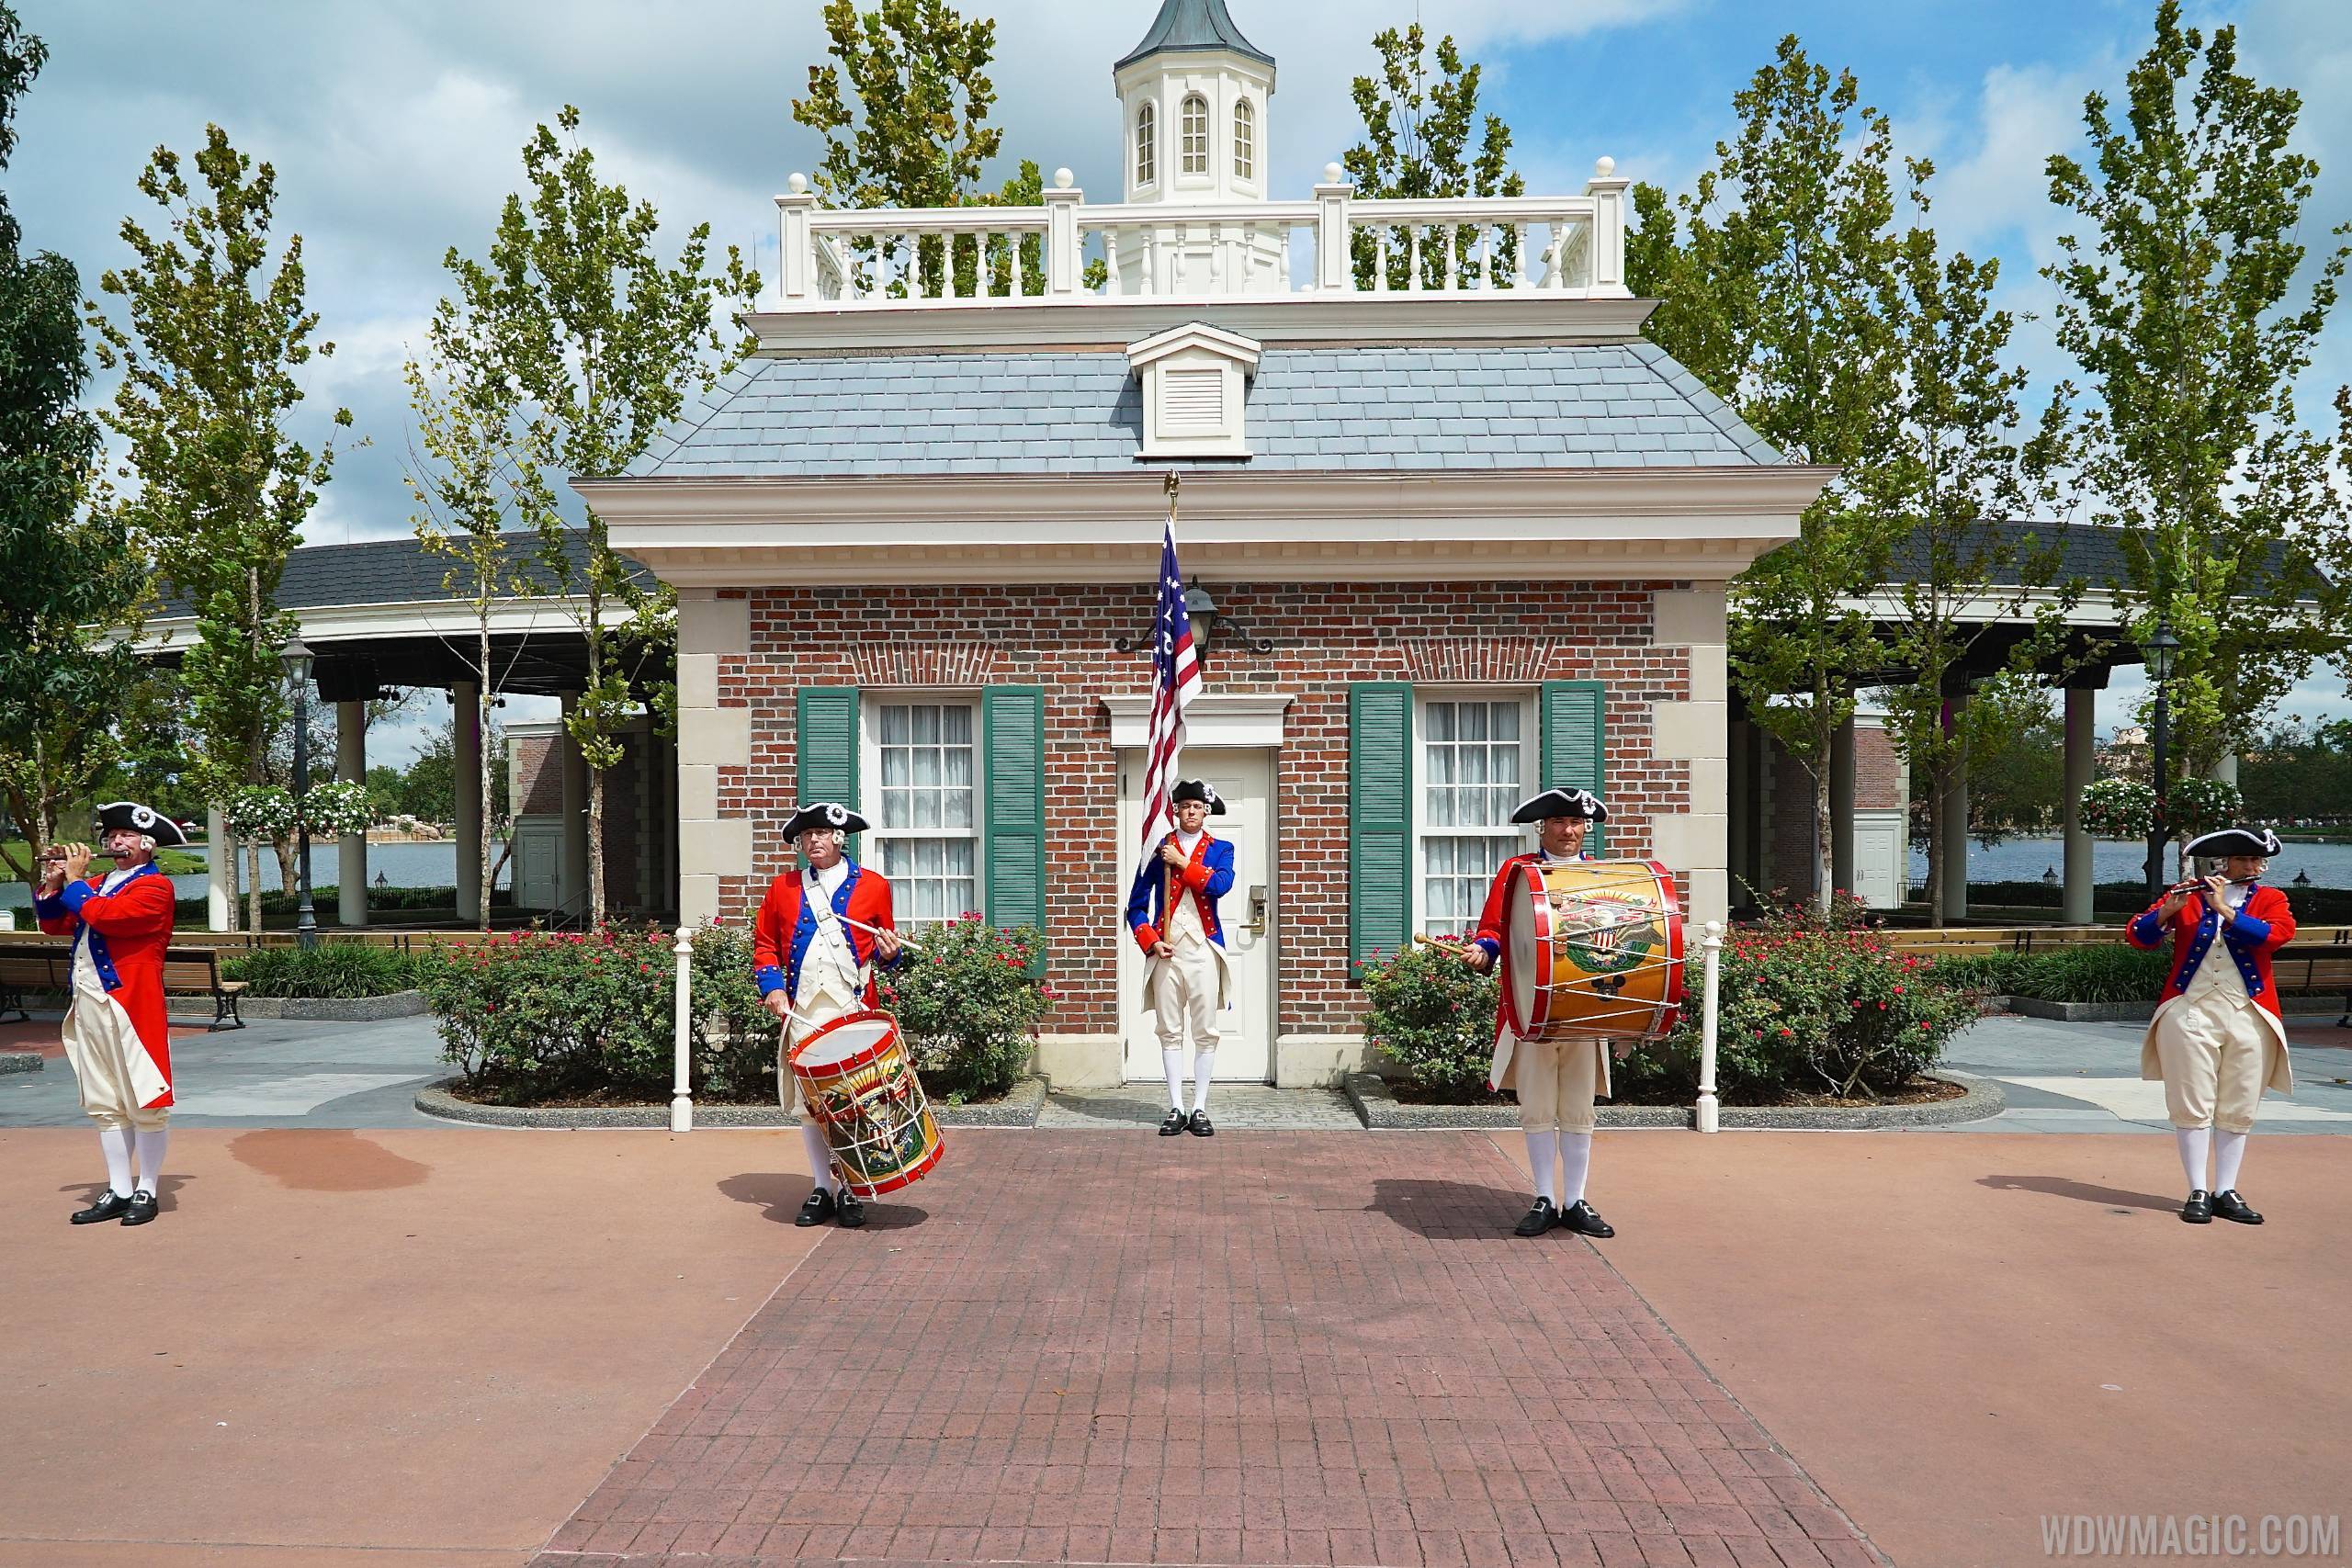 VIDEO - The Spirit of America Fife and Drum Corps final performance at Epcot's American Adventure pavilion